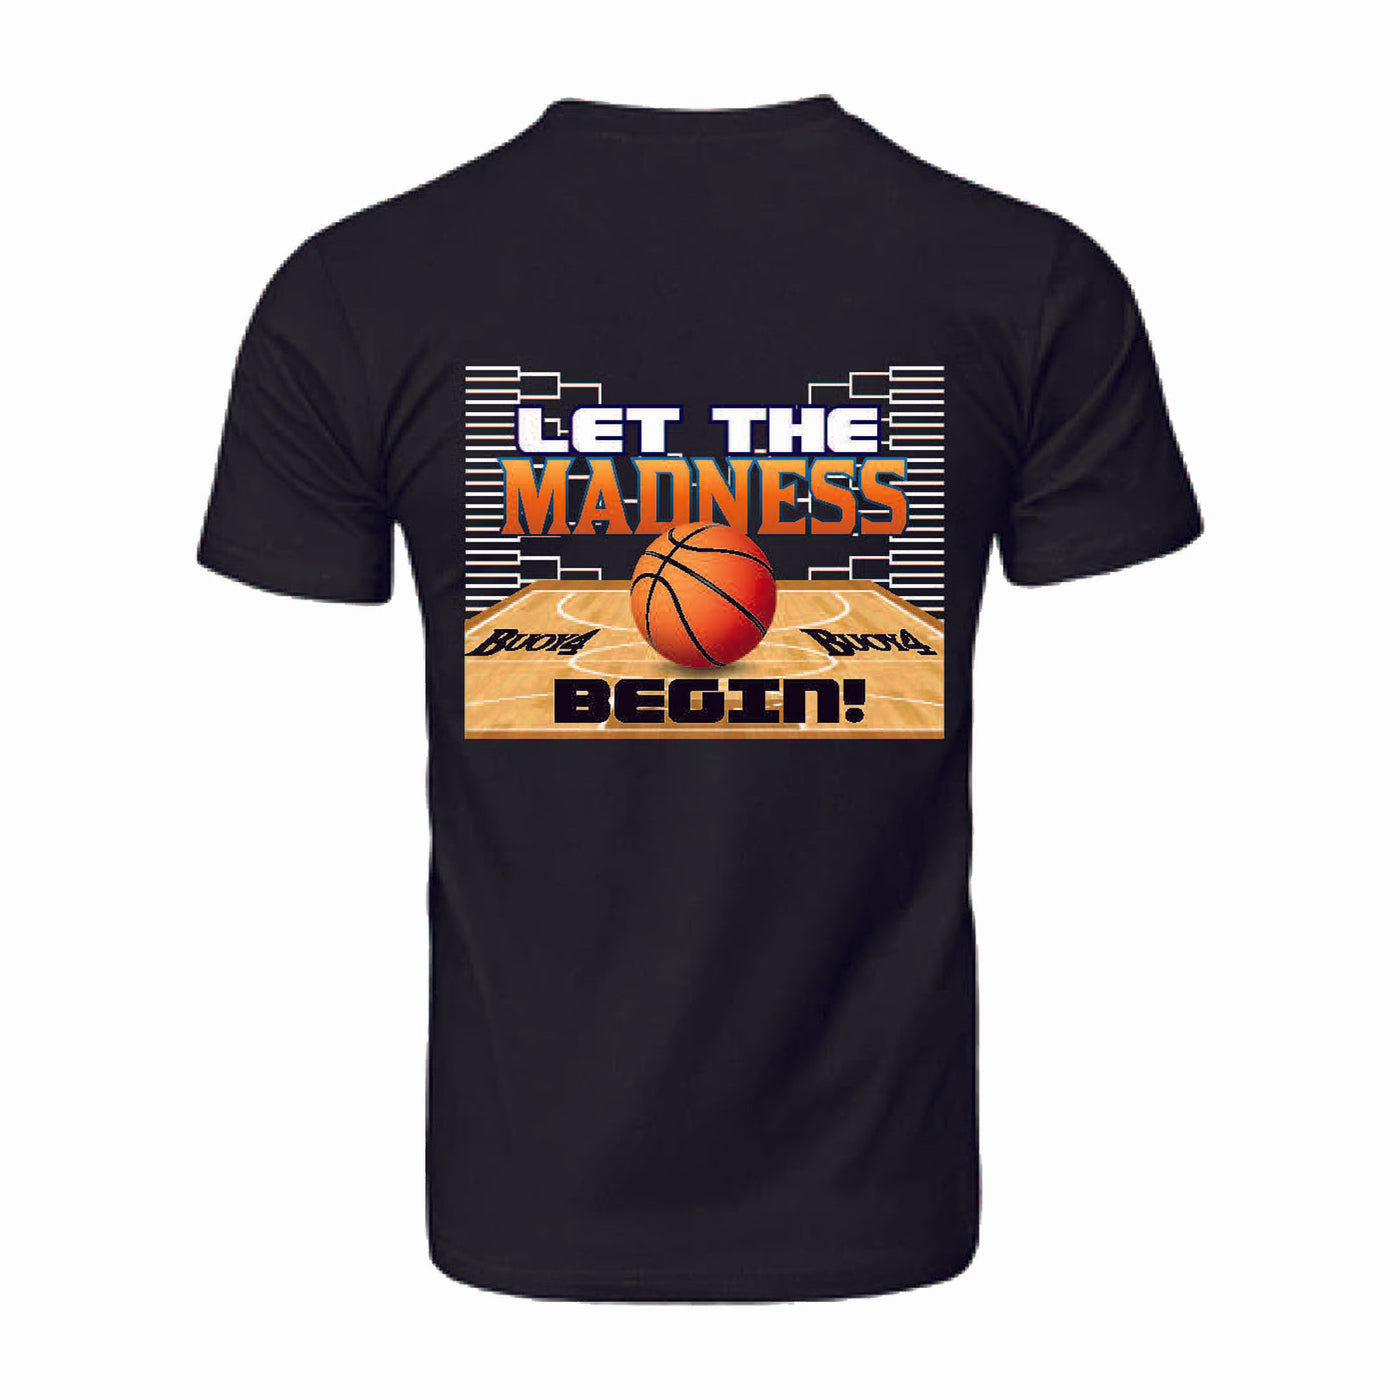 March Madness Tee (Black)